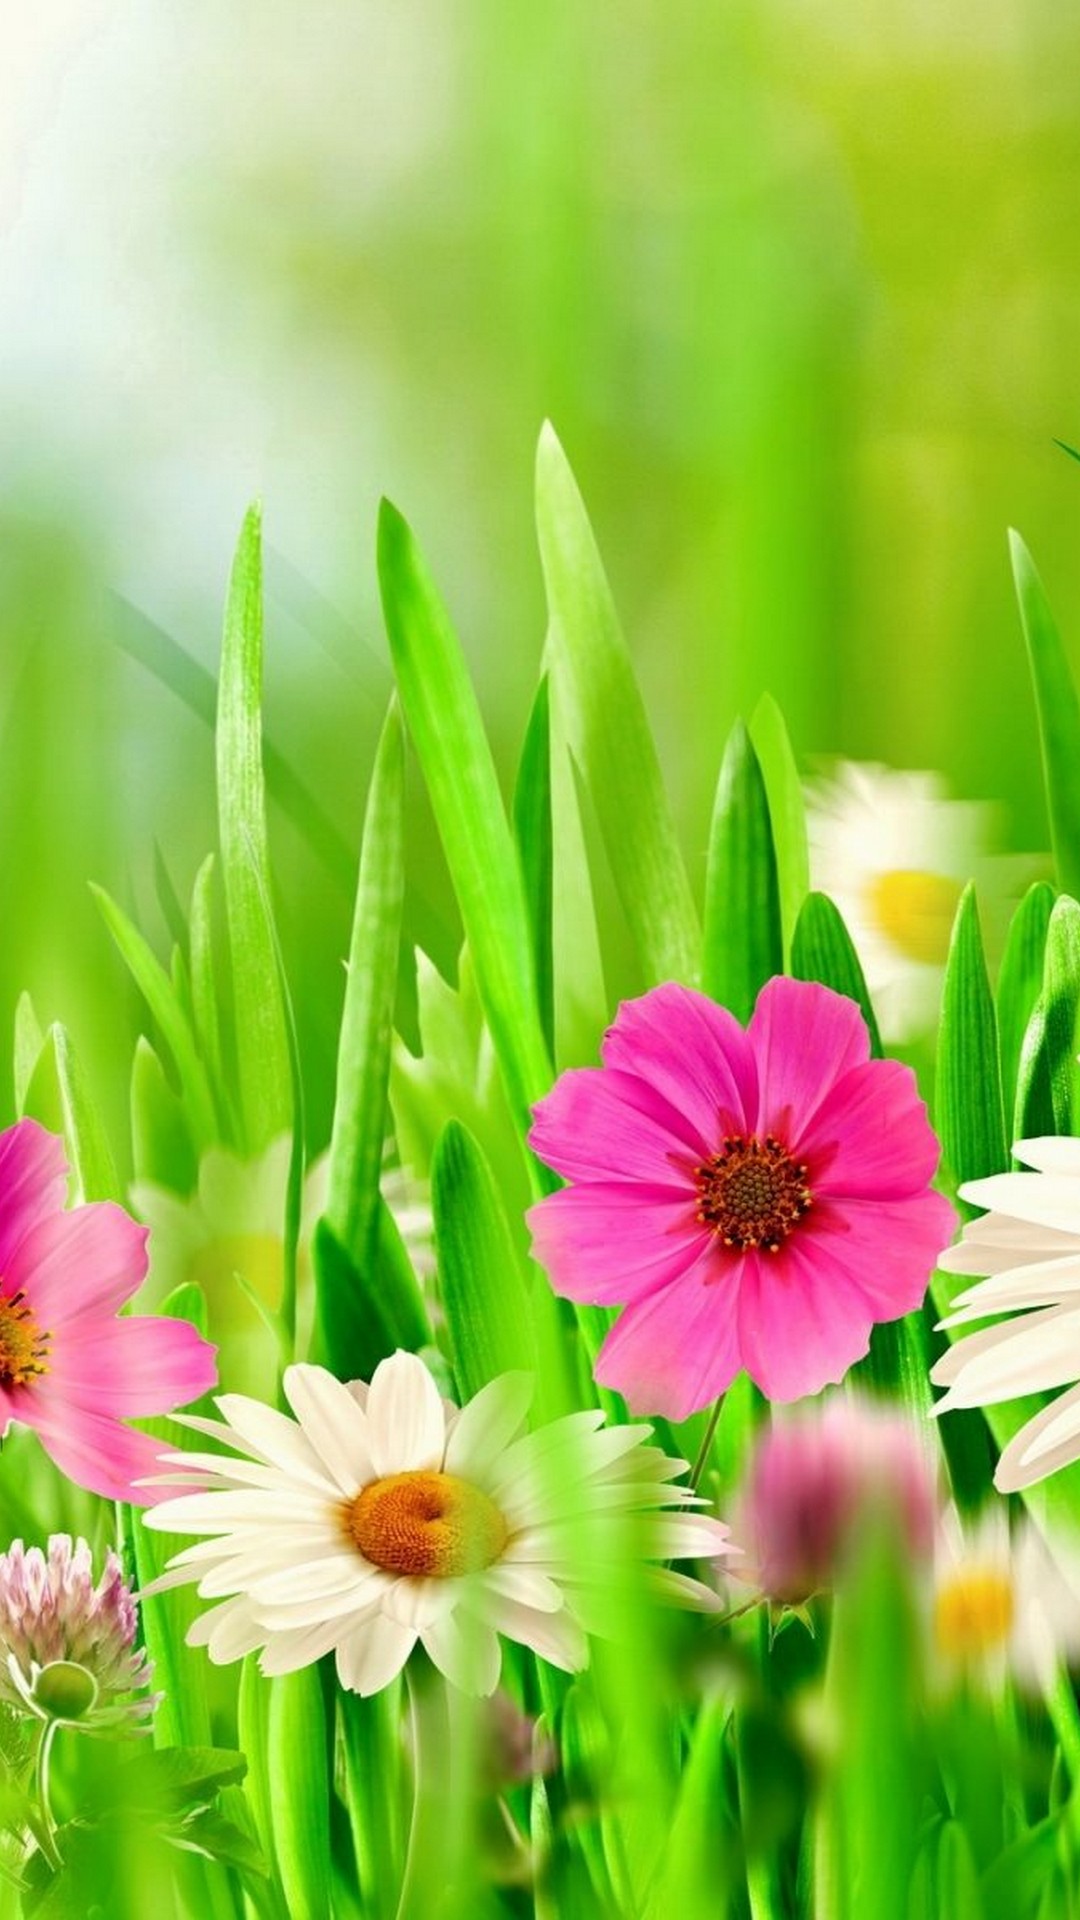 iPhone Wallpaper Spring Flowers with HD Resolution 1080X1920